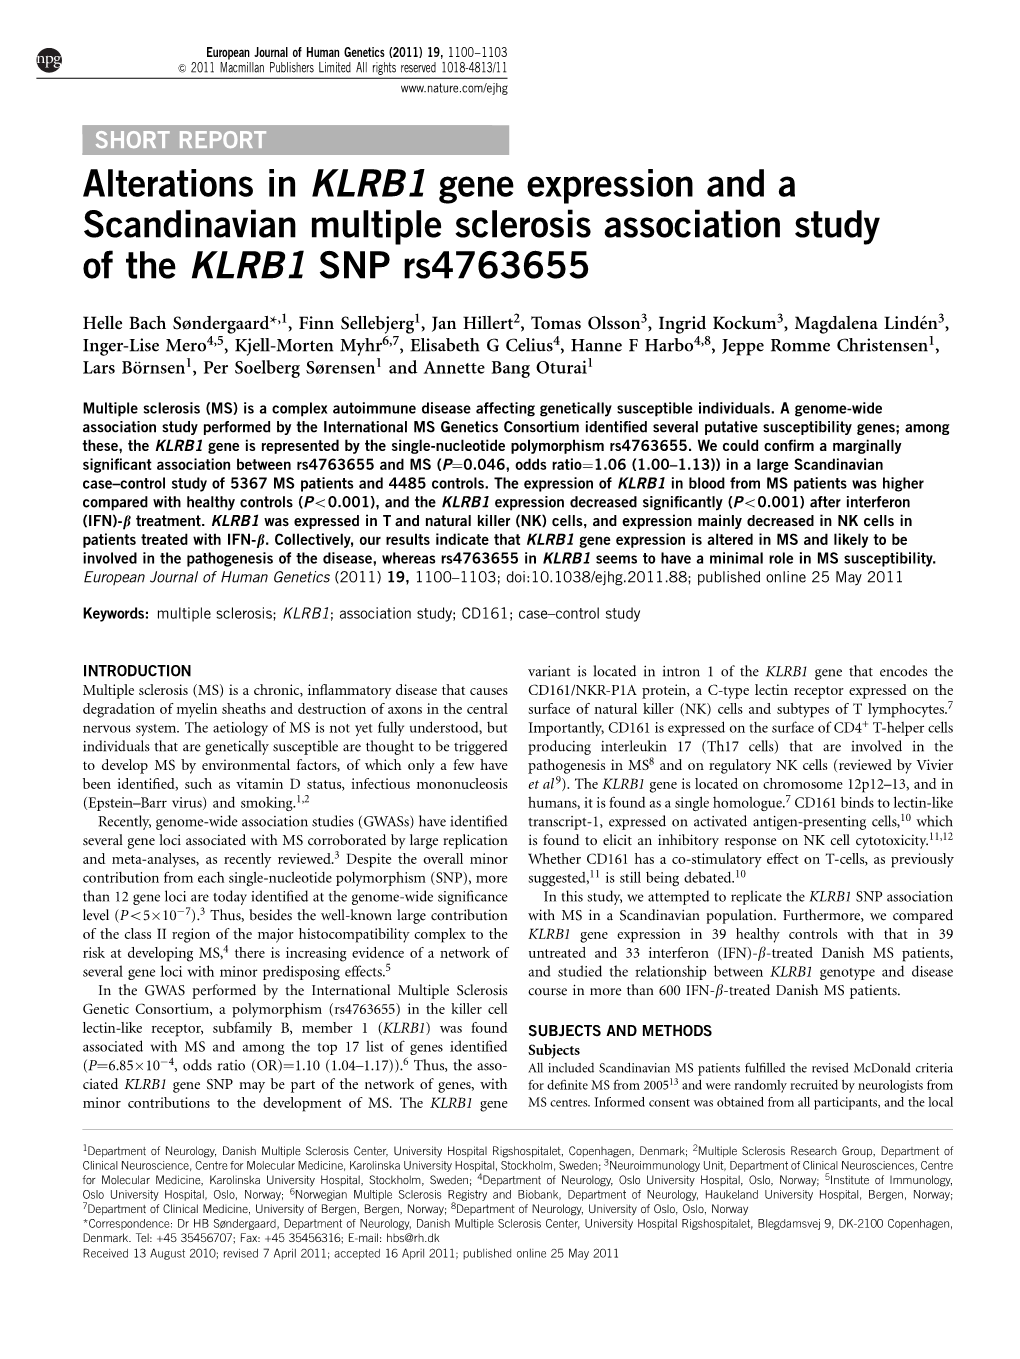 Alterations in KLRB1 Gene Expression and a Scandinavian Multiple Sclerosis Association Study of the KLRB1 SNP Rs4763655